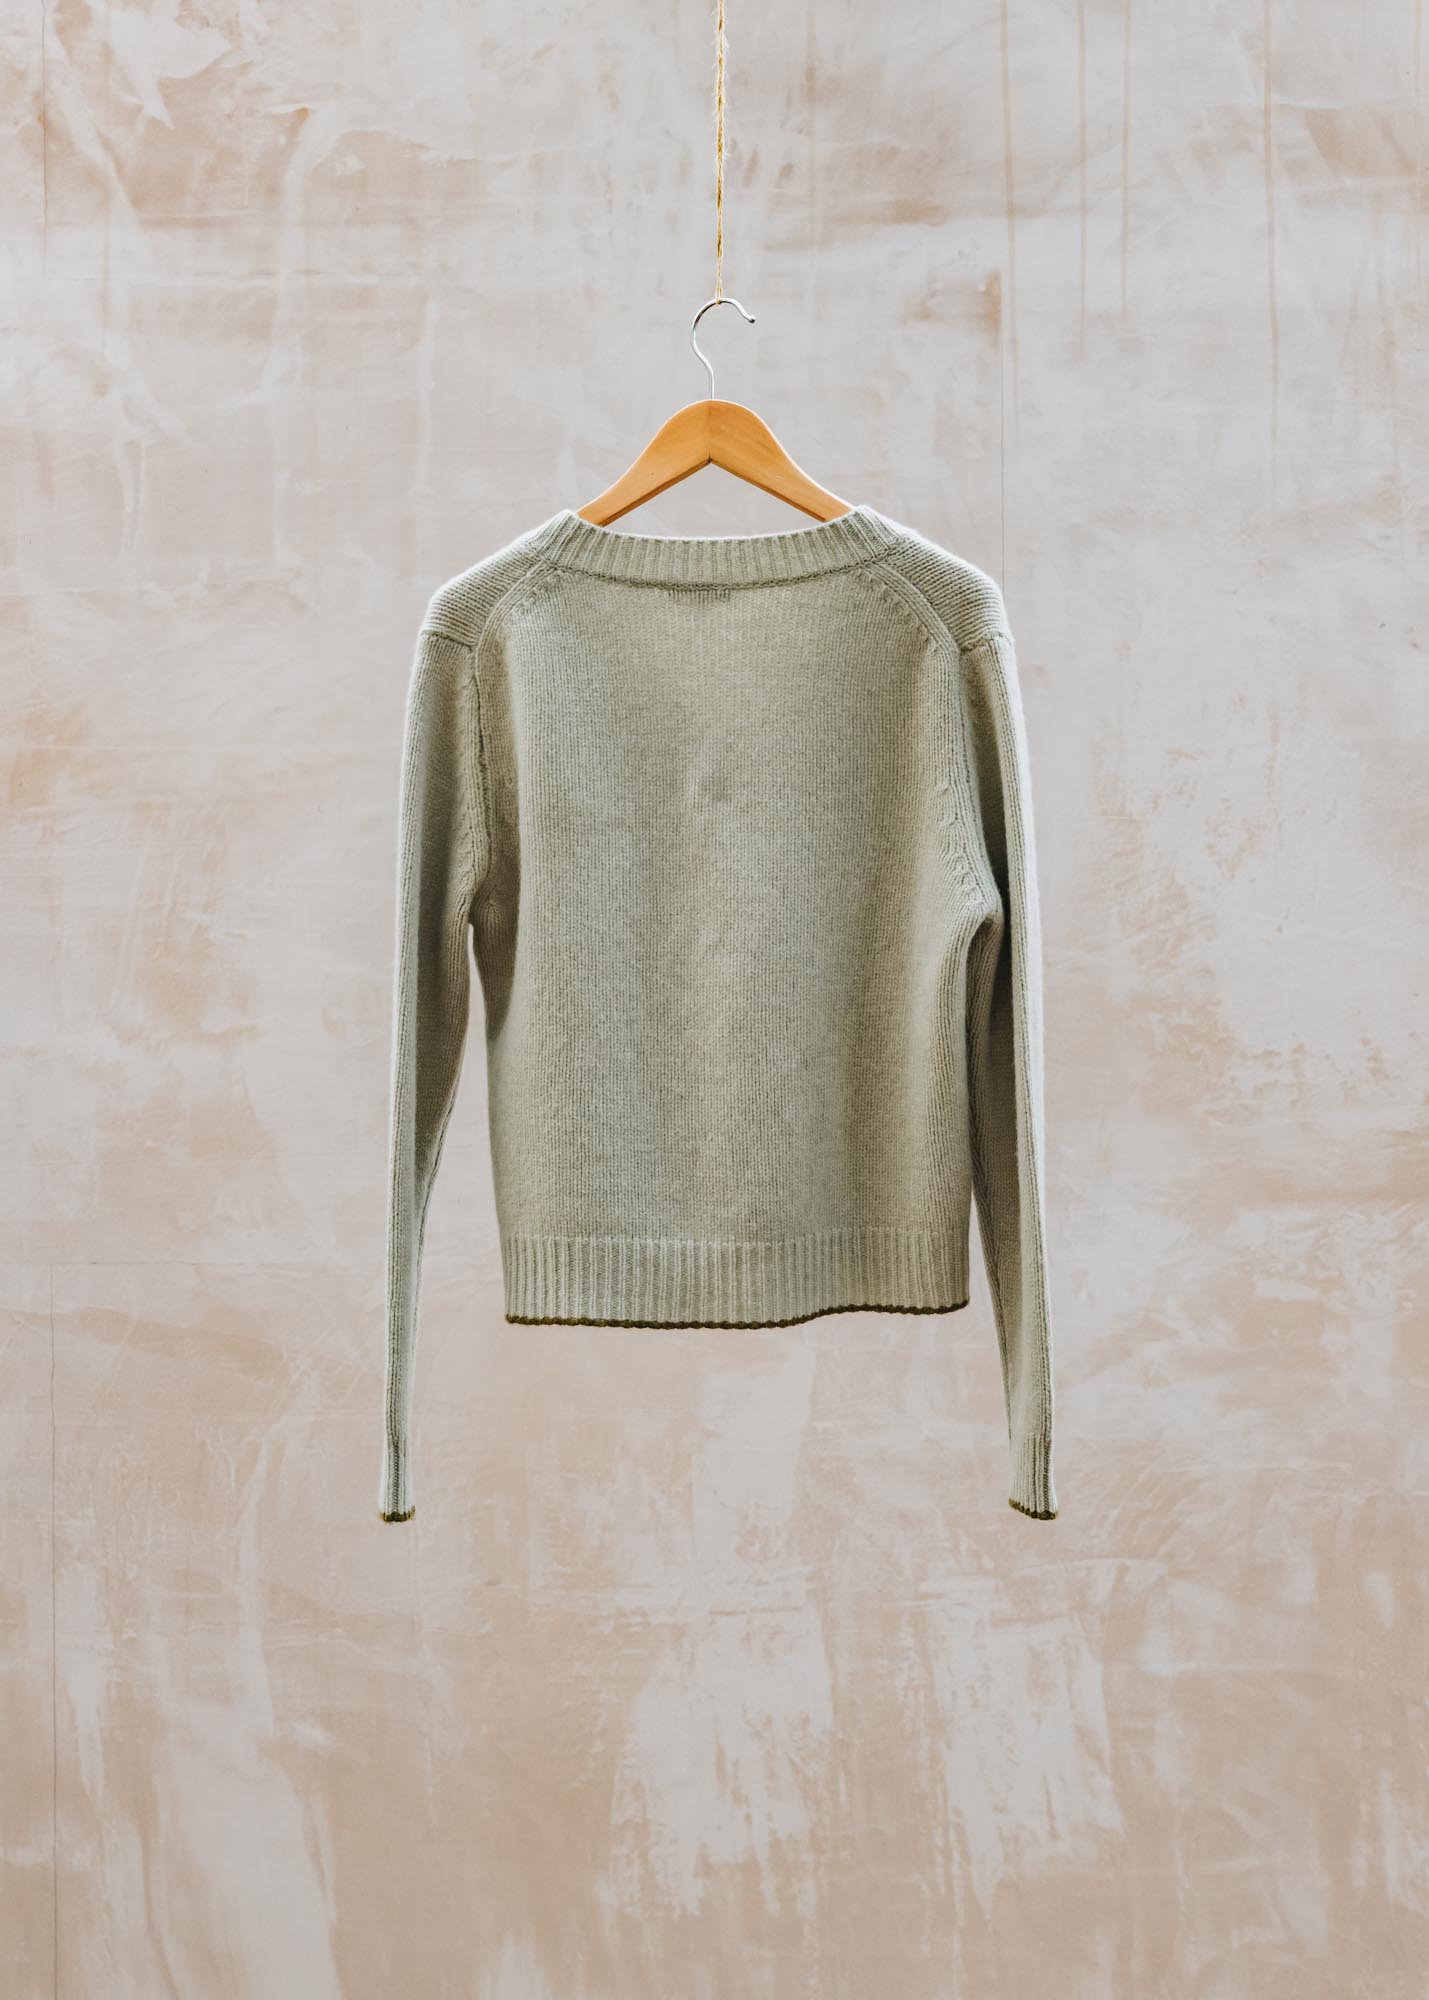 Cash-Ca Chunky Tipped V-Neck Jumper in Pebble and Olive